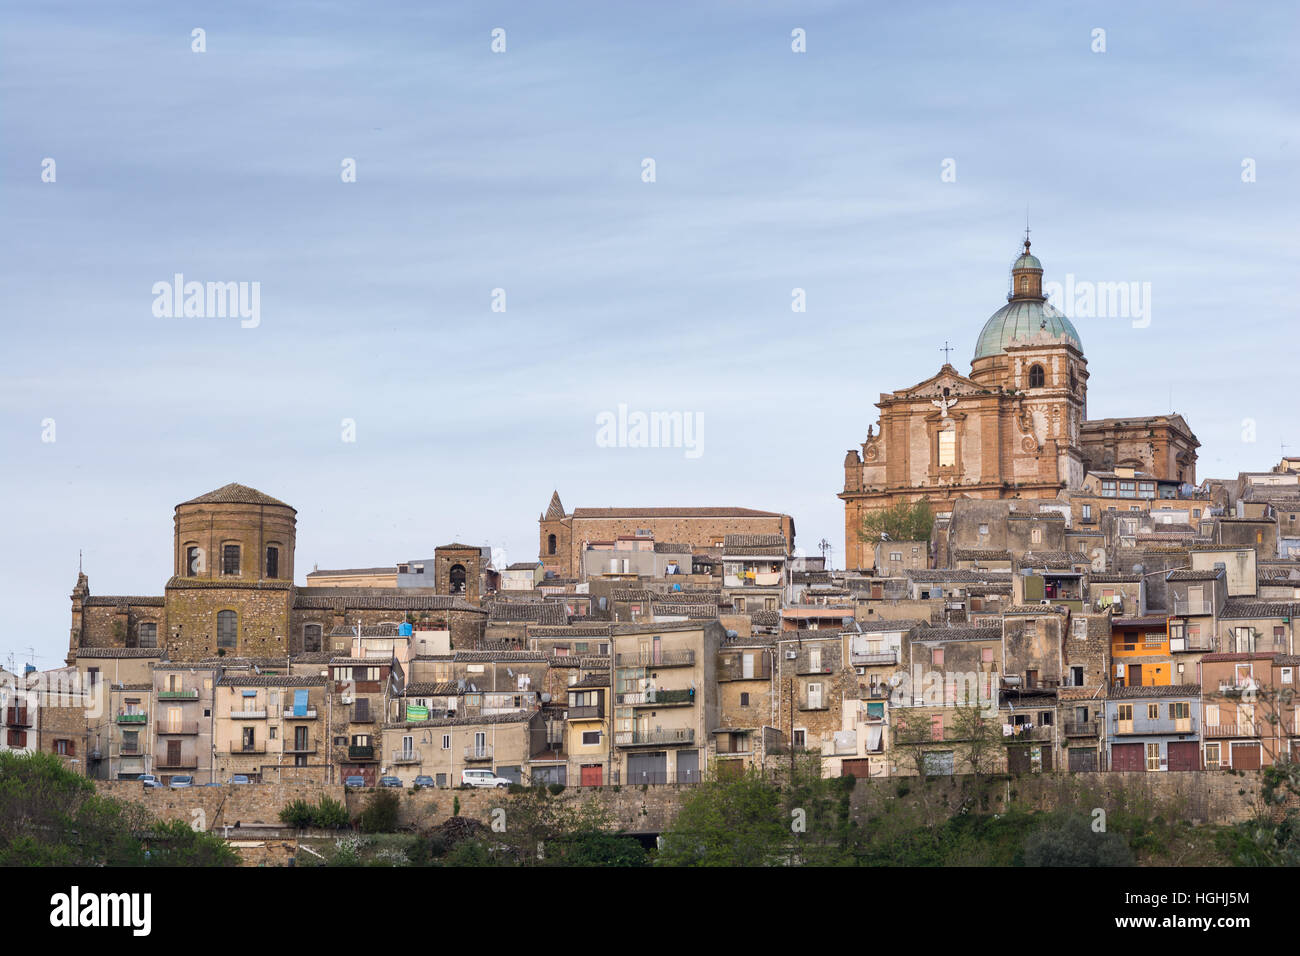 Ancient landscape of Piazza Armerina at sunset. From sunlight to night light passing through the blue hour. You see the baroque cathedral, Holy Mary o Stock Photo